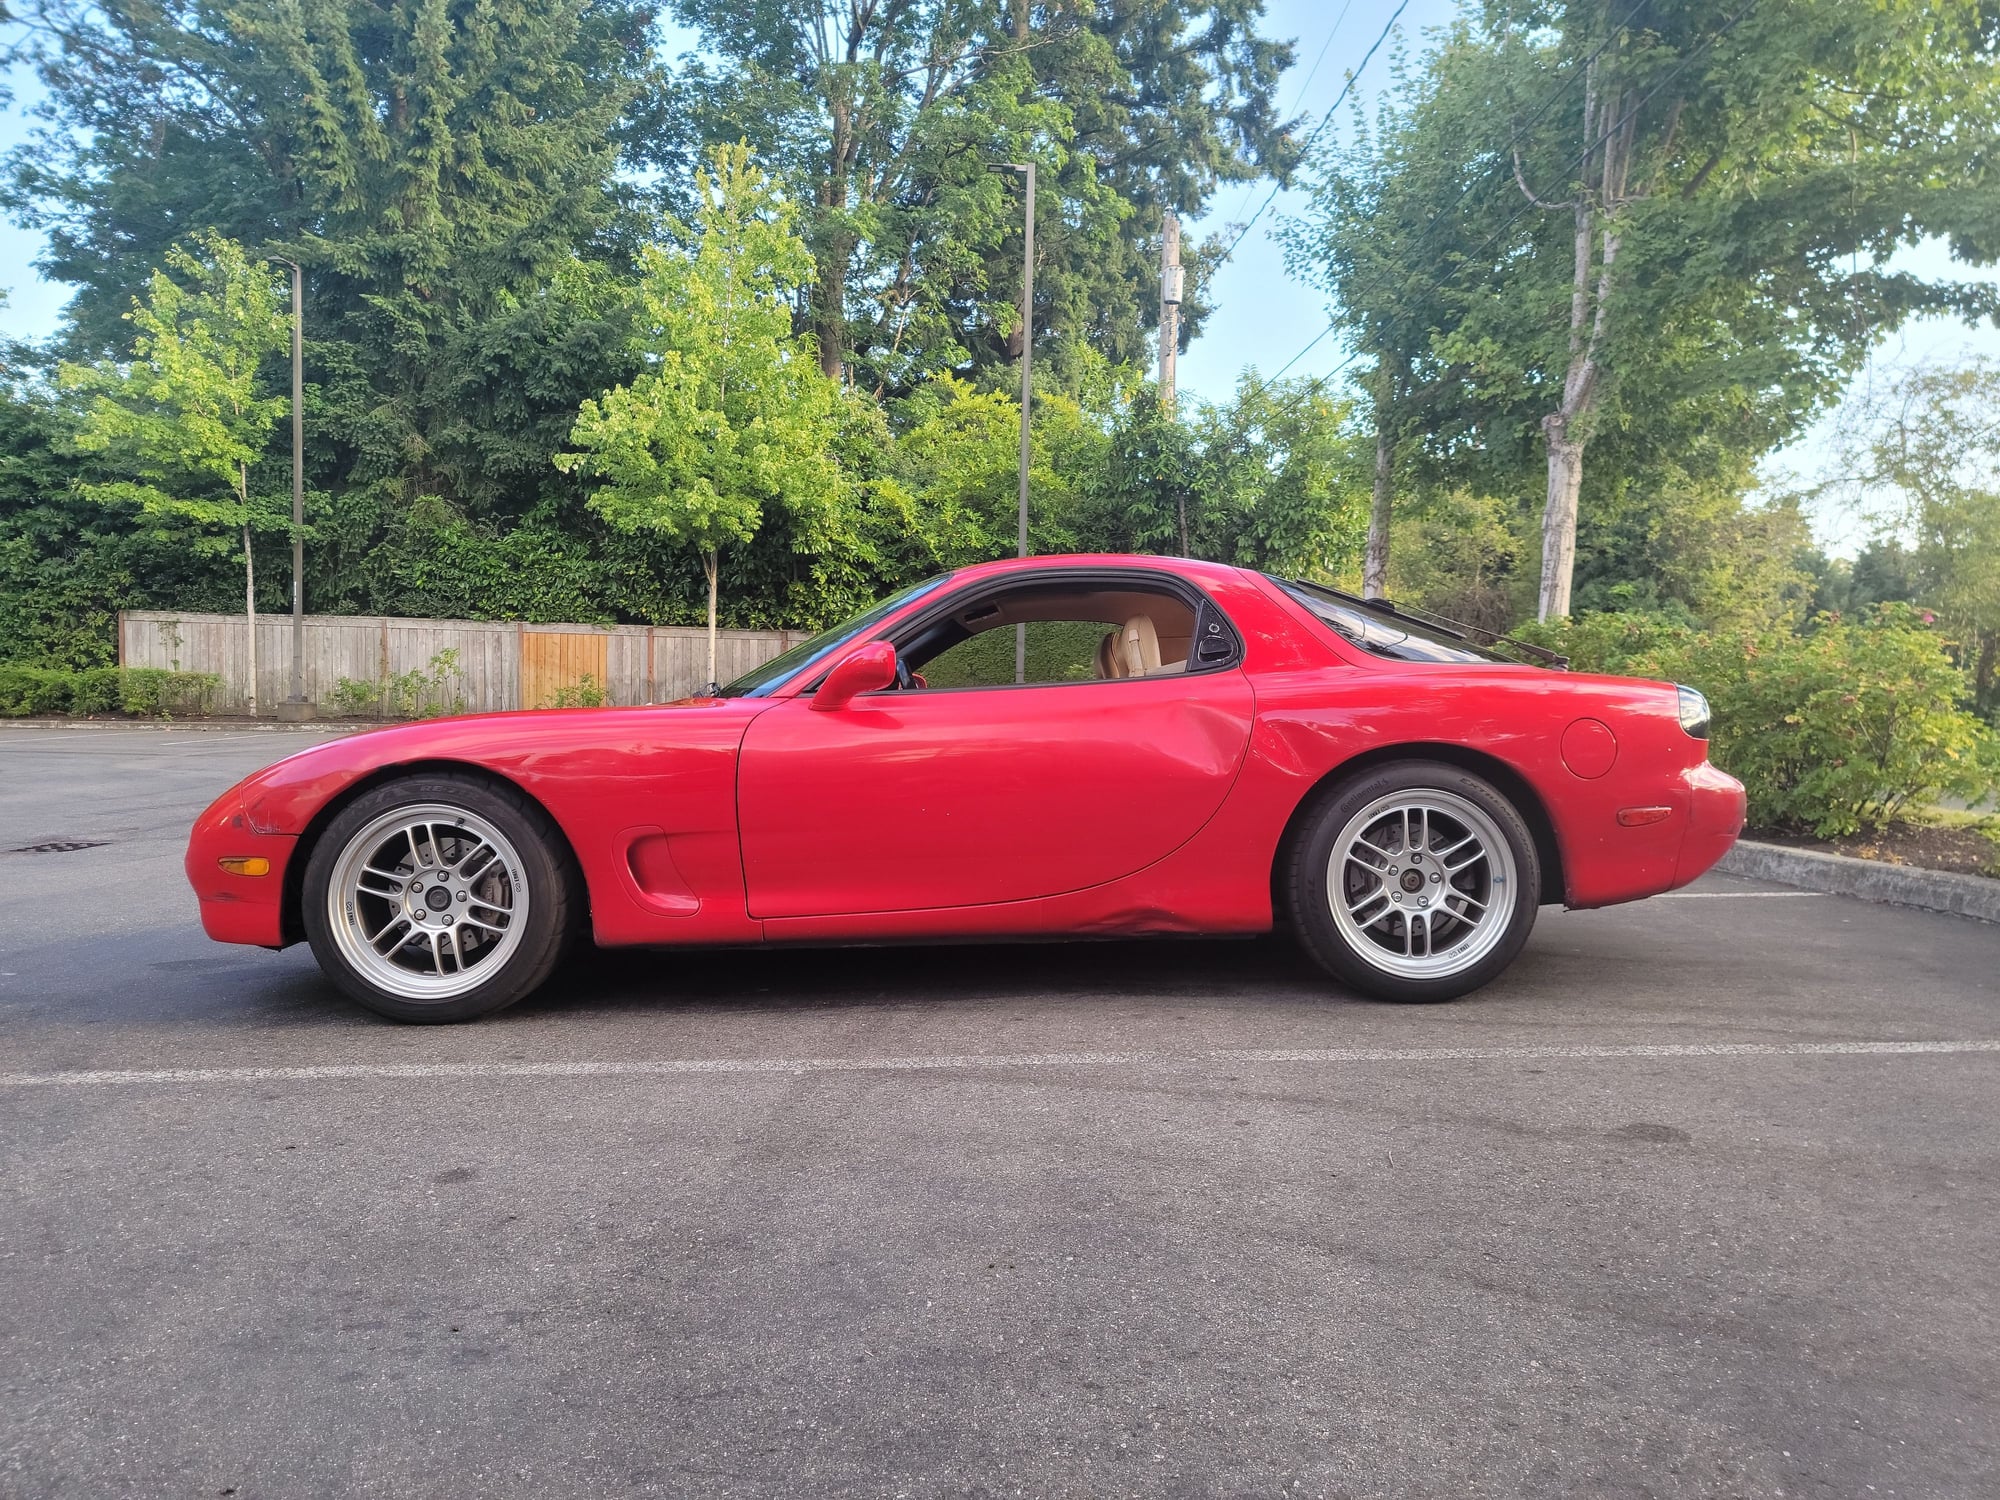 1993 Mazda RX-7 - Wts 1993 fd rx-7 30k obo - Used - VIN JM1FD3312P0205401 - 155,080 Miles - 2 cyl - 2WD - Automatic - Coupe - Red - Burien, WA 98166, United States